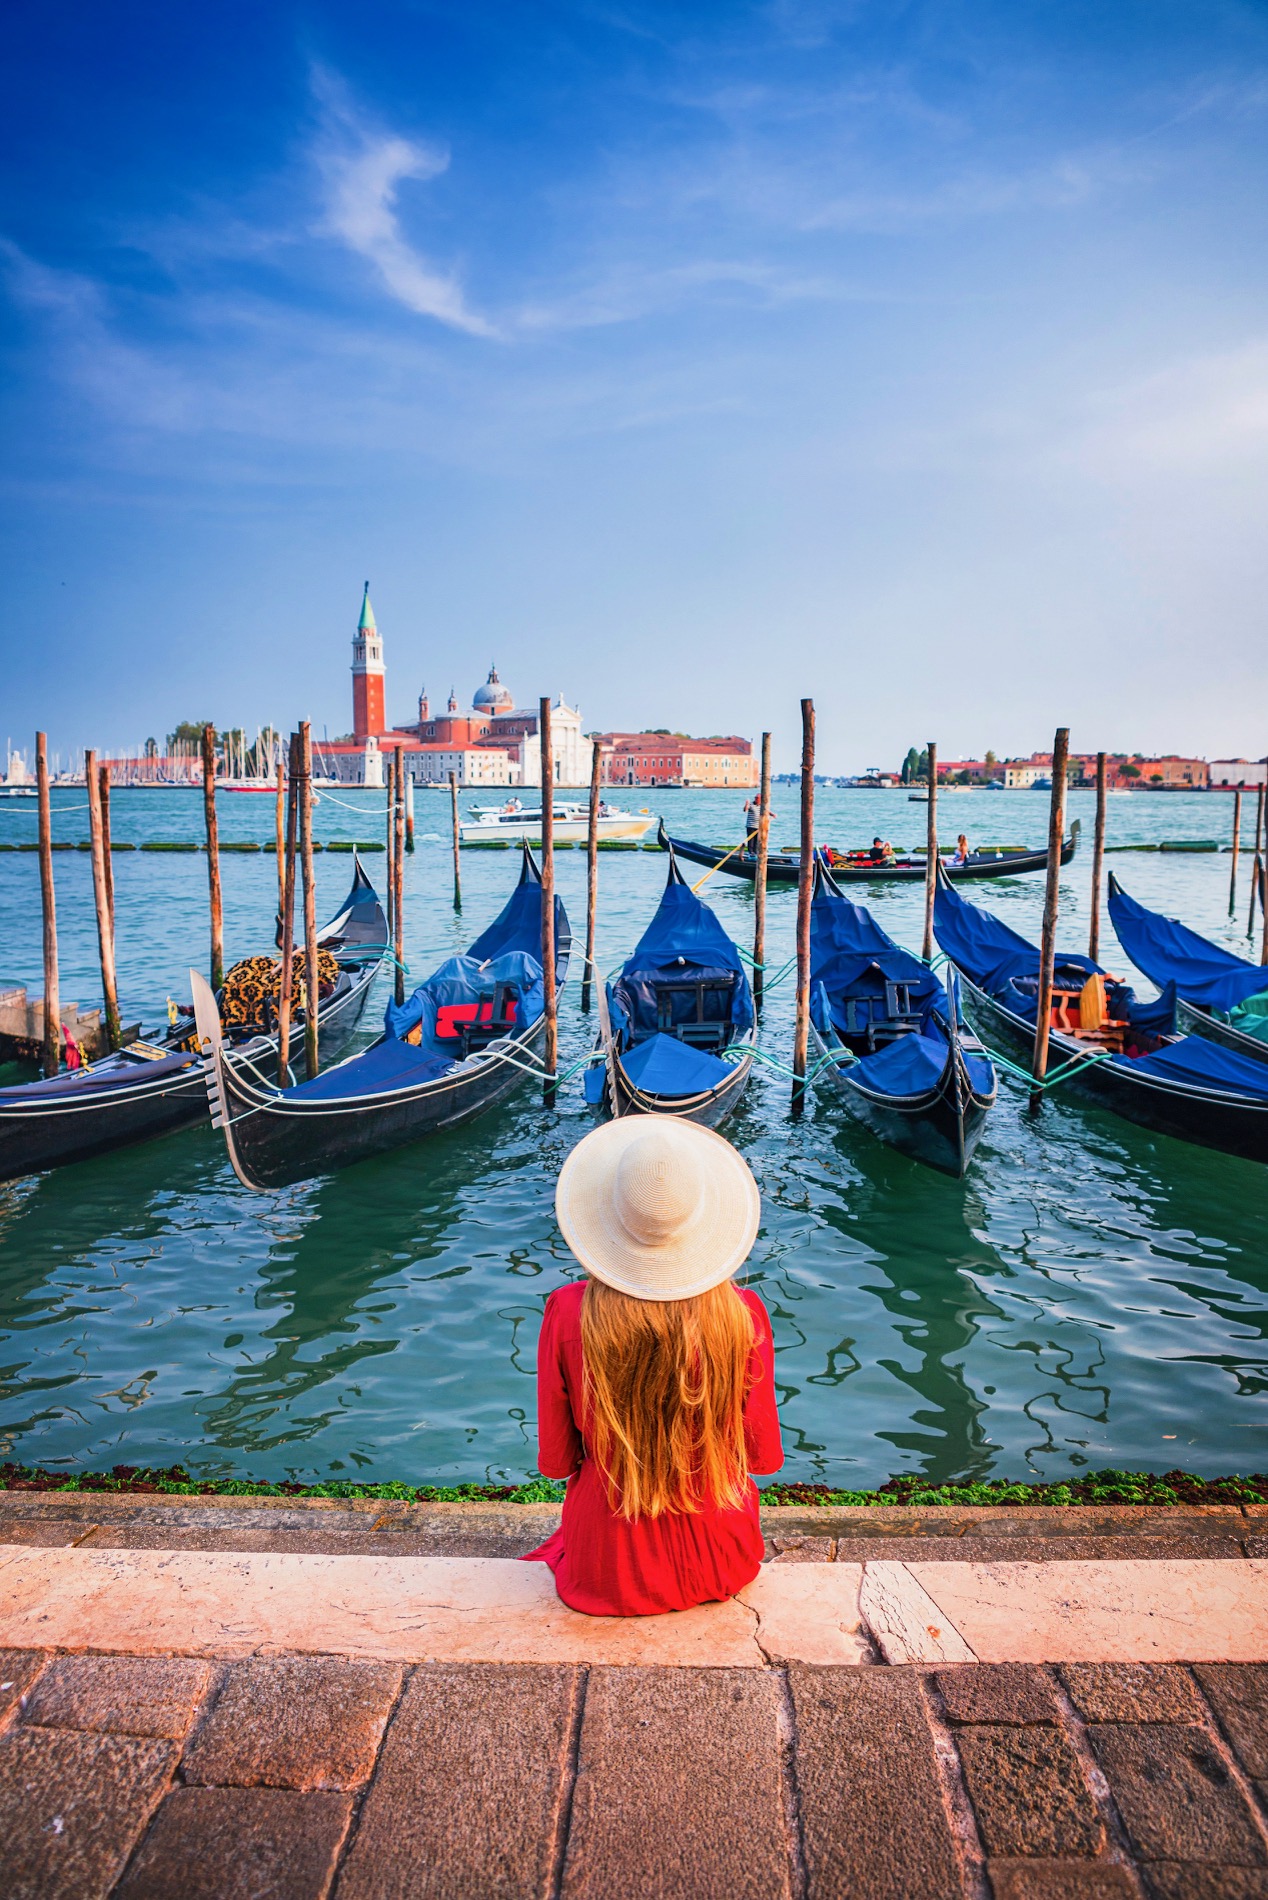 Woman sitting on the edge of the Venice lagoon with blue gondolas during 10 days in Italy itinerary.